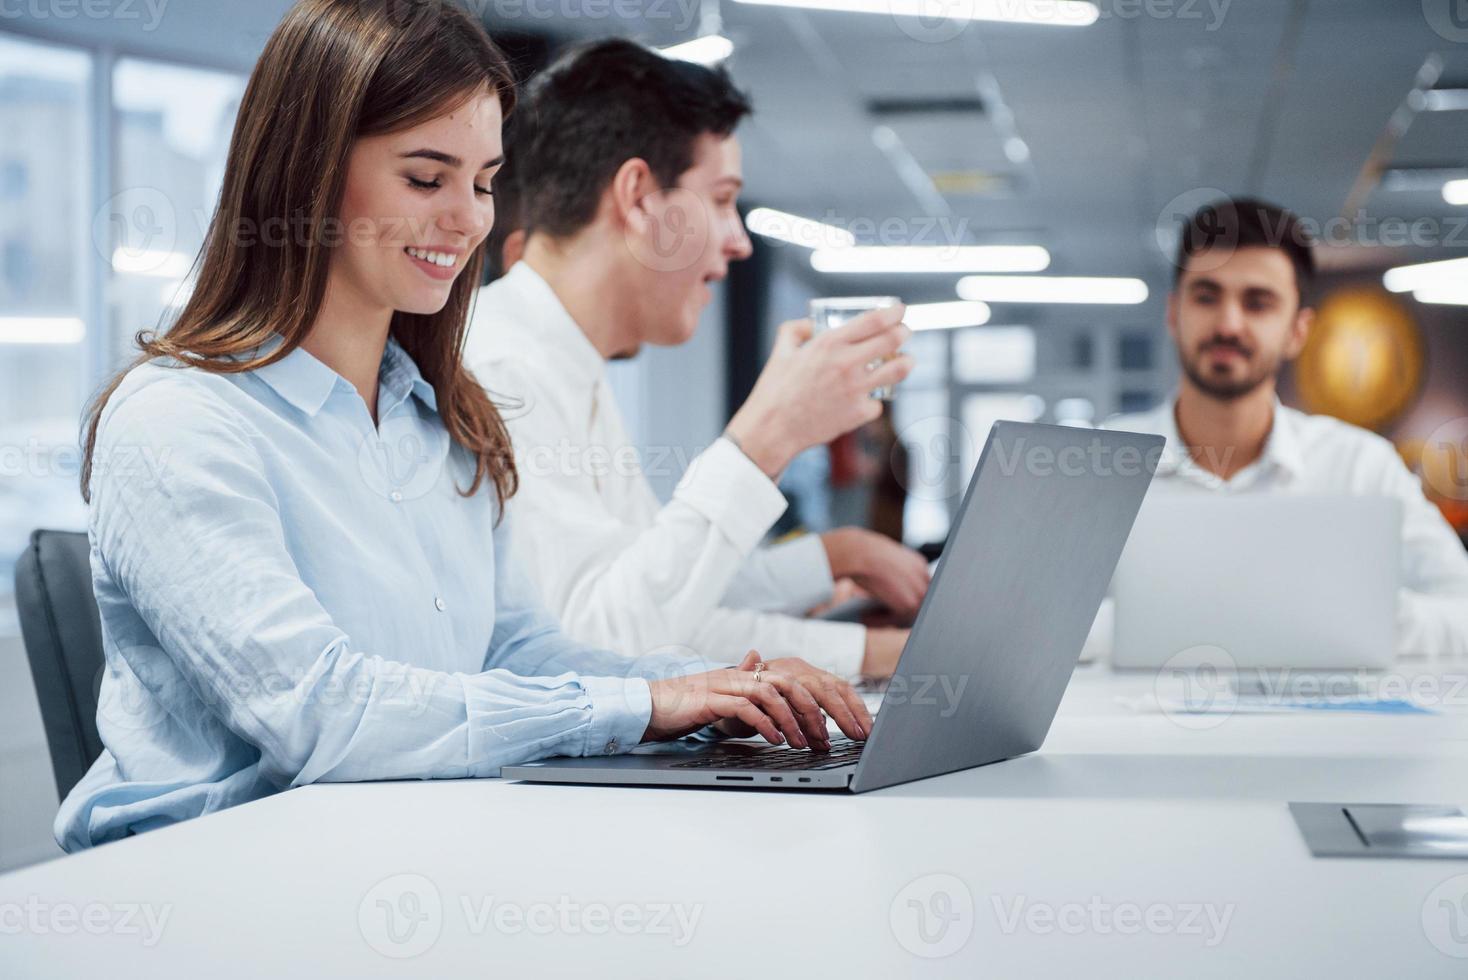 Woman type a text while guy behind have drink from silver glass. Side view of girl works on the silver colored laptop in the office and smiling photo